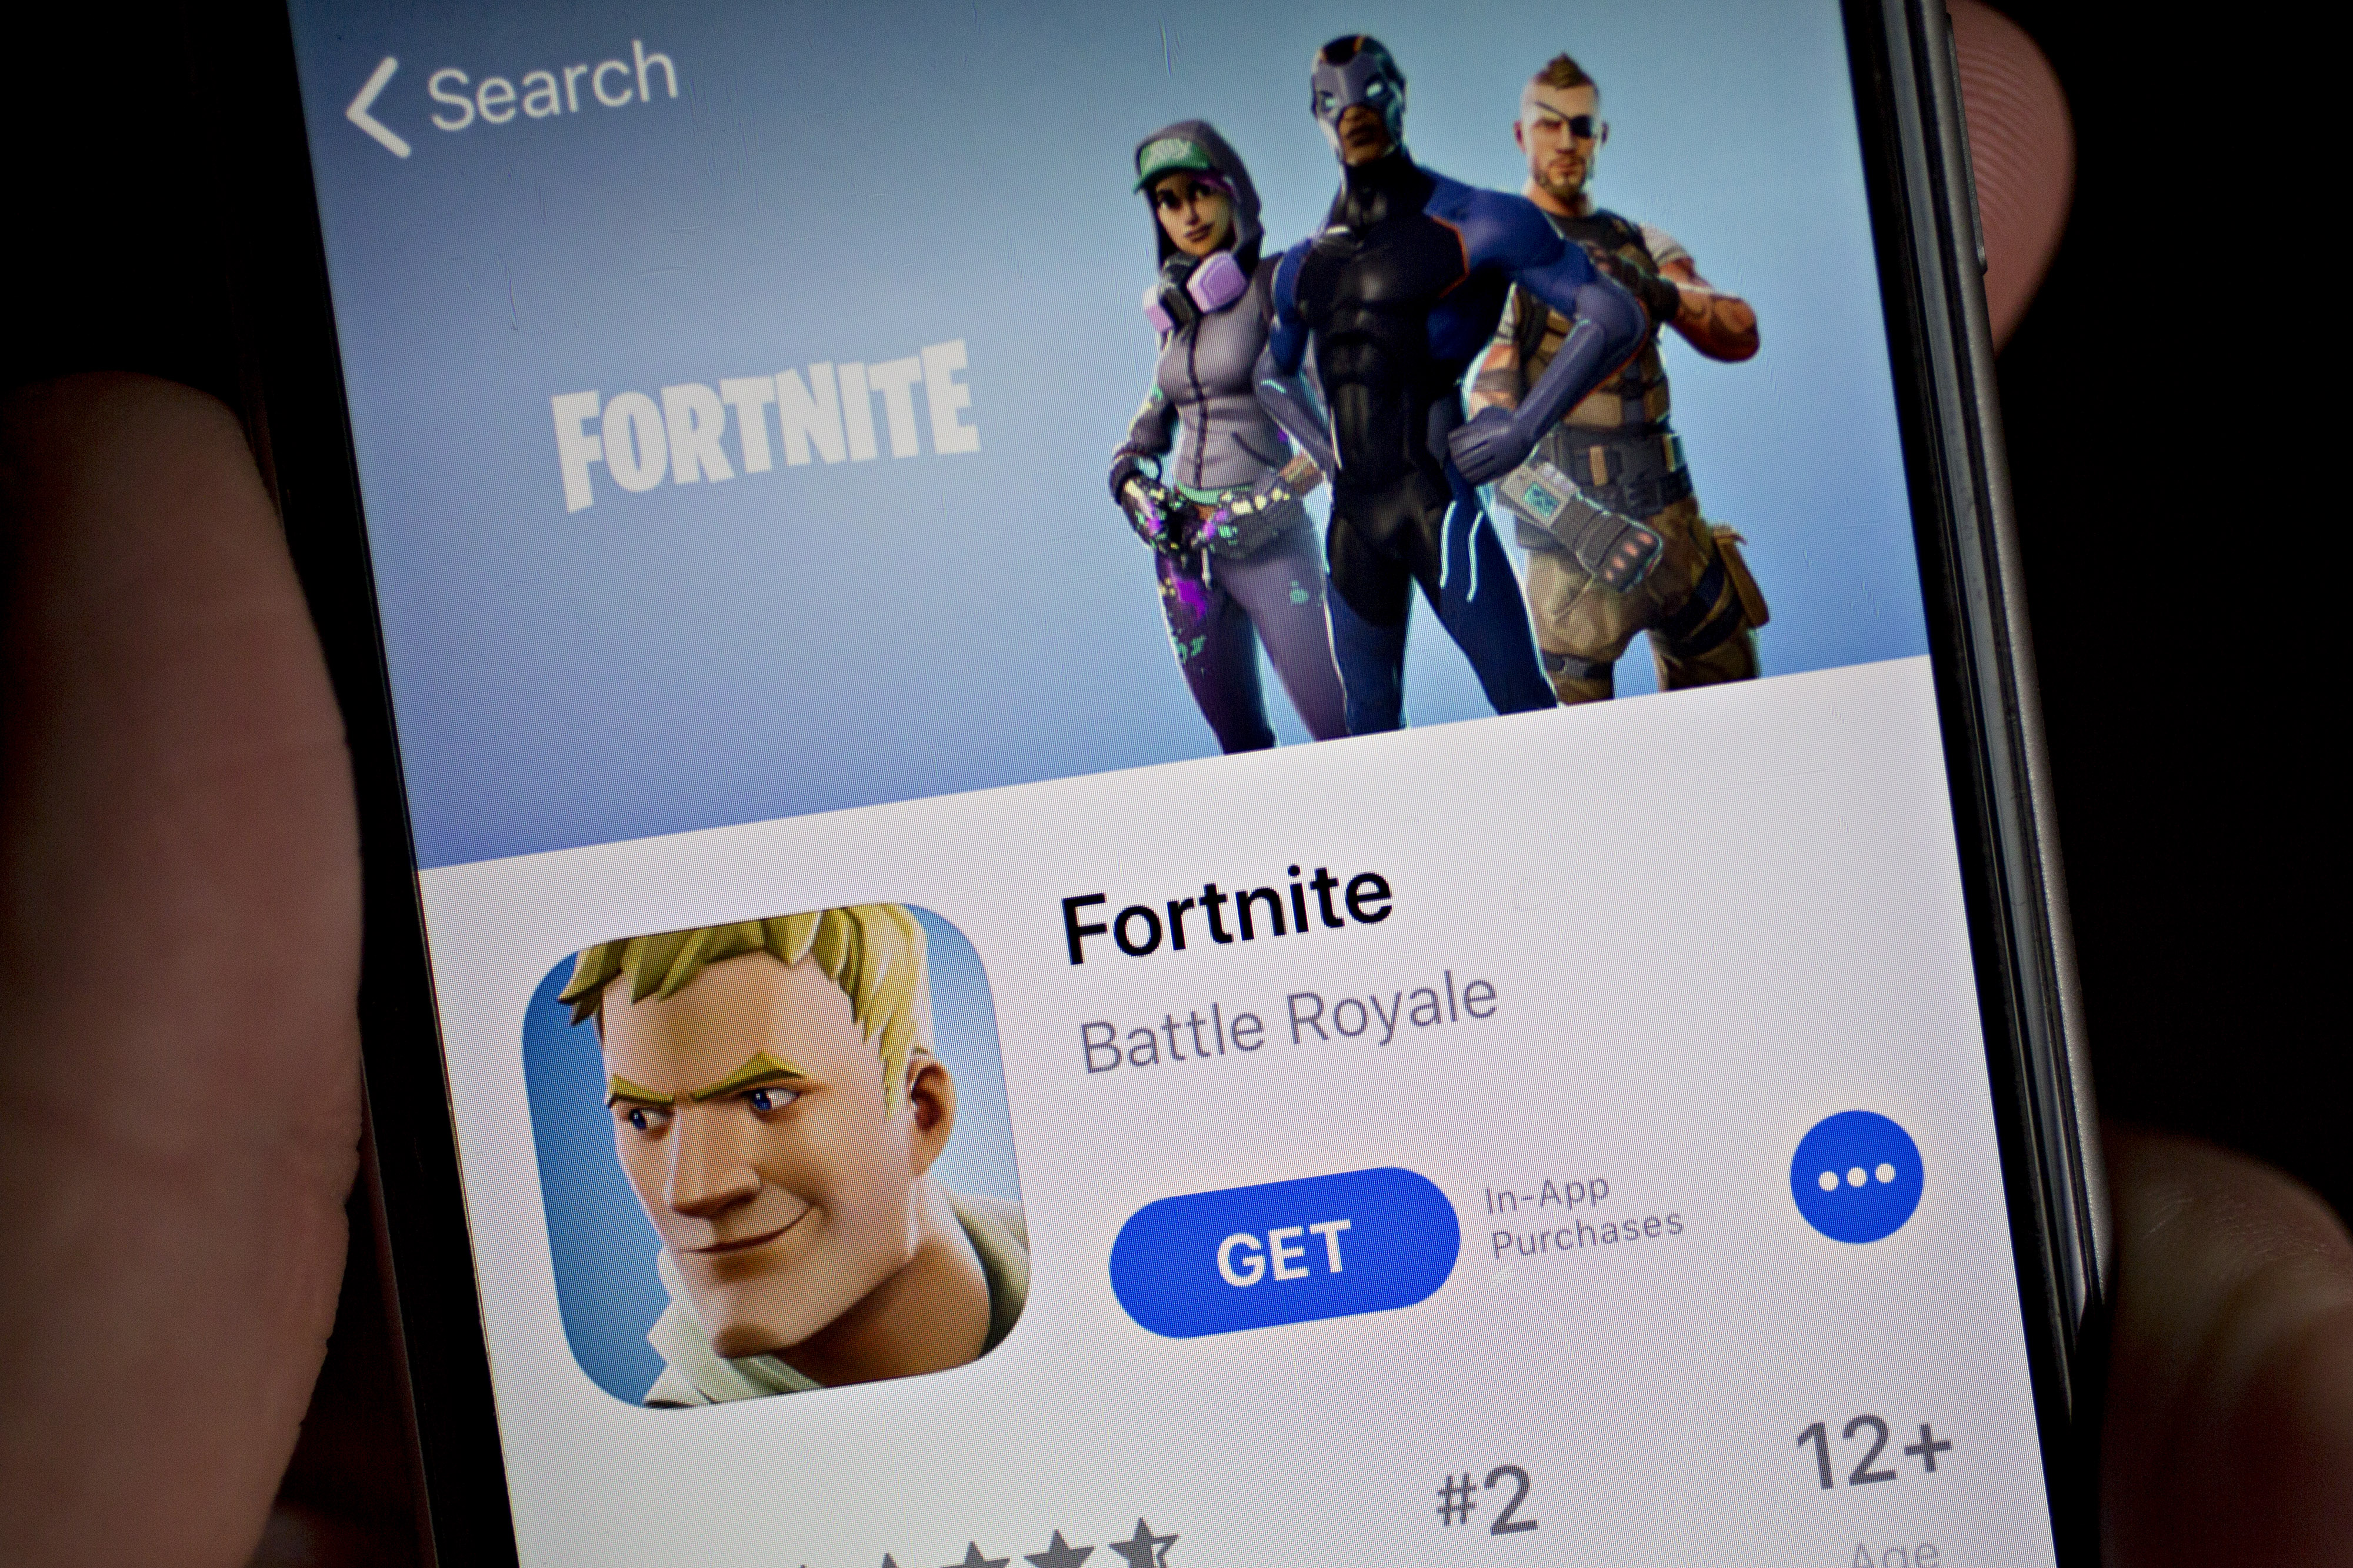 Ios Players Fortnite Epic Files Suit Against Apple After Fortnite Pulled From Ios App Store Updated Ars Technica